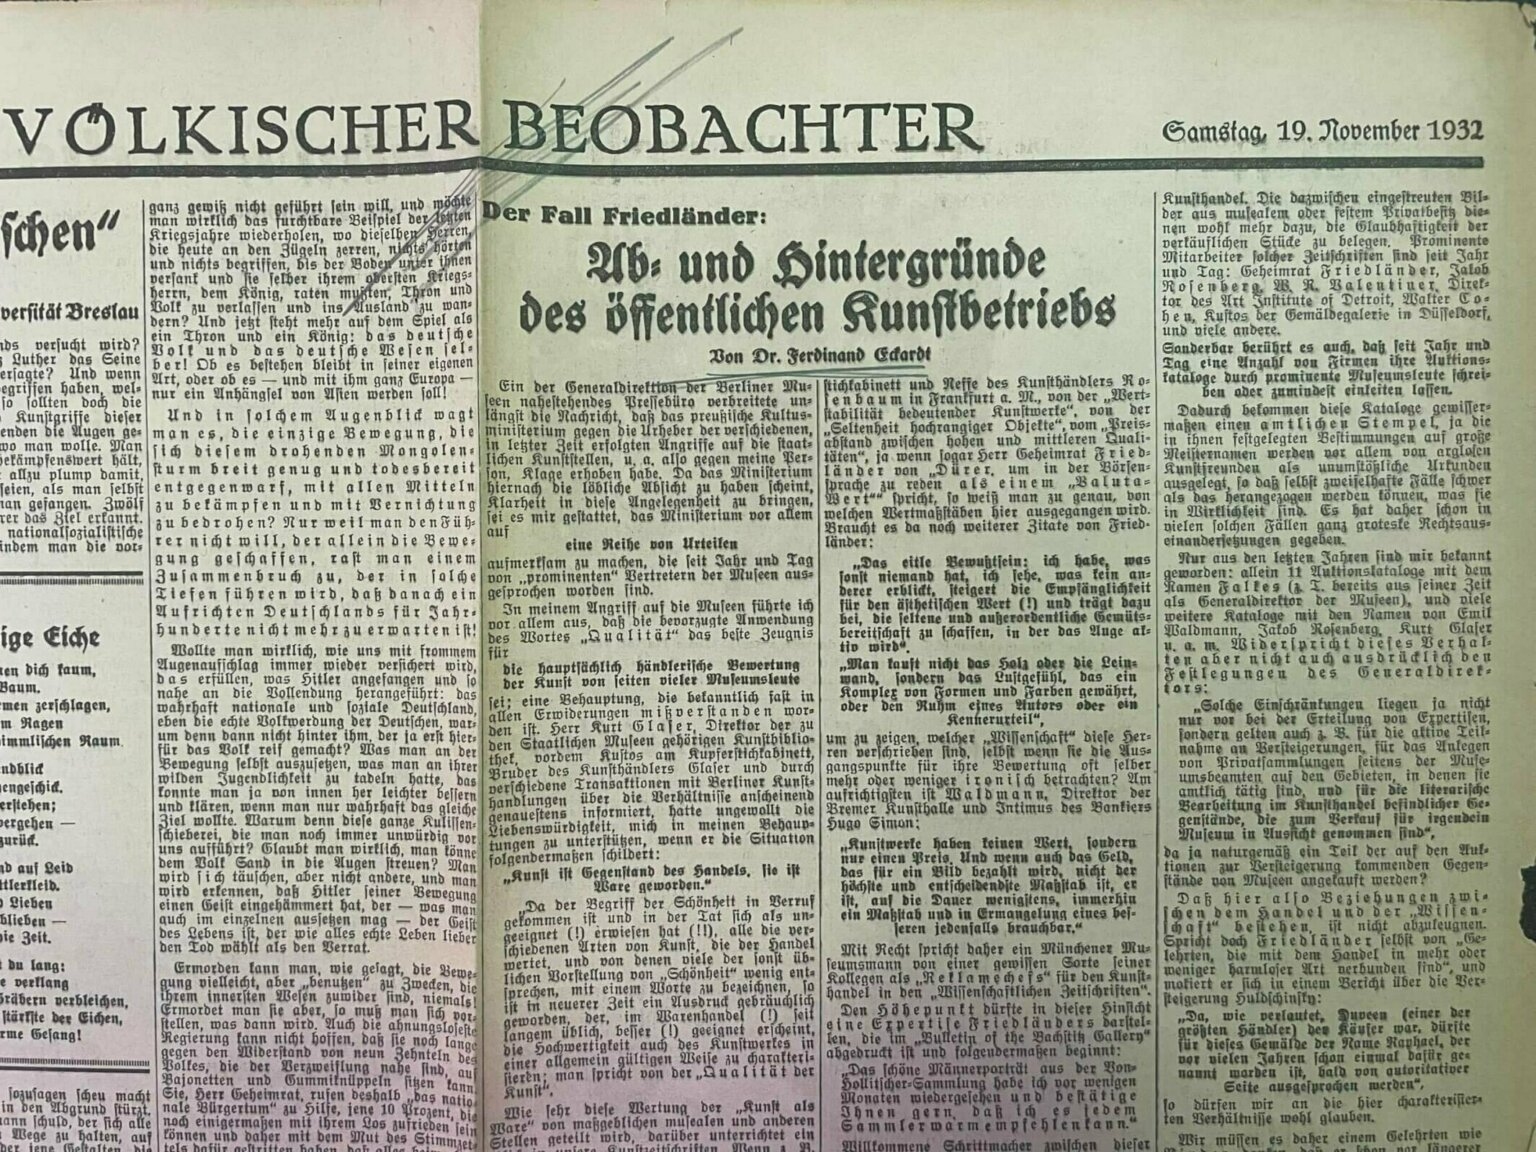 Eckhardt’s copy of his Volkischer Beobachter article, which he admits ...